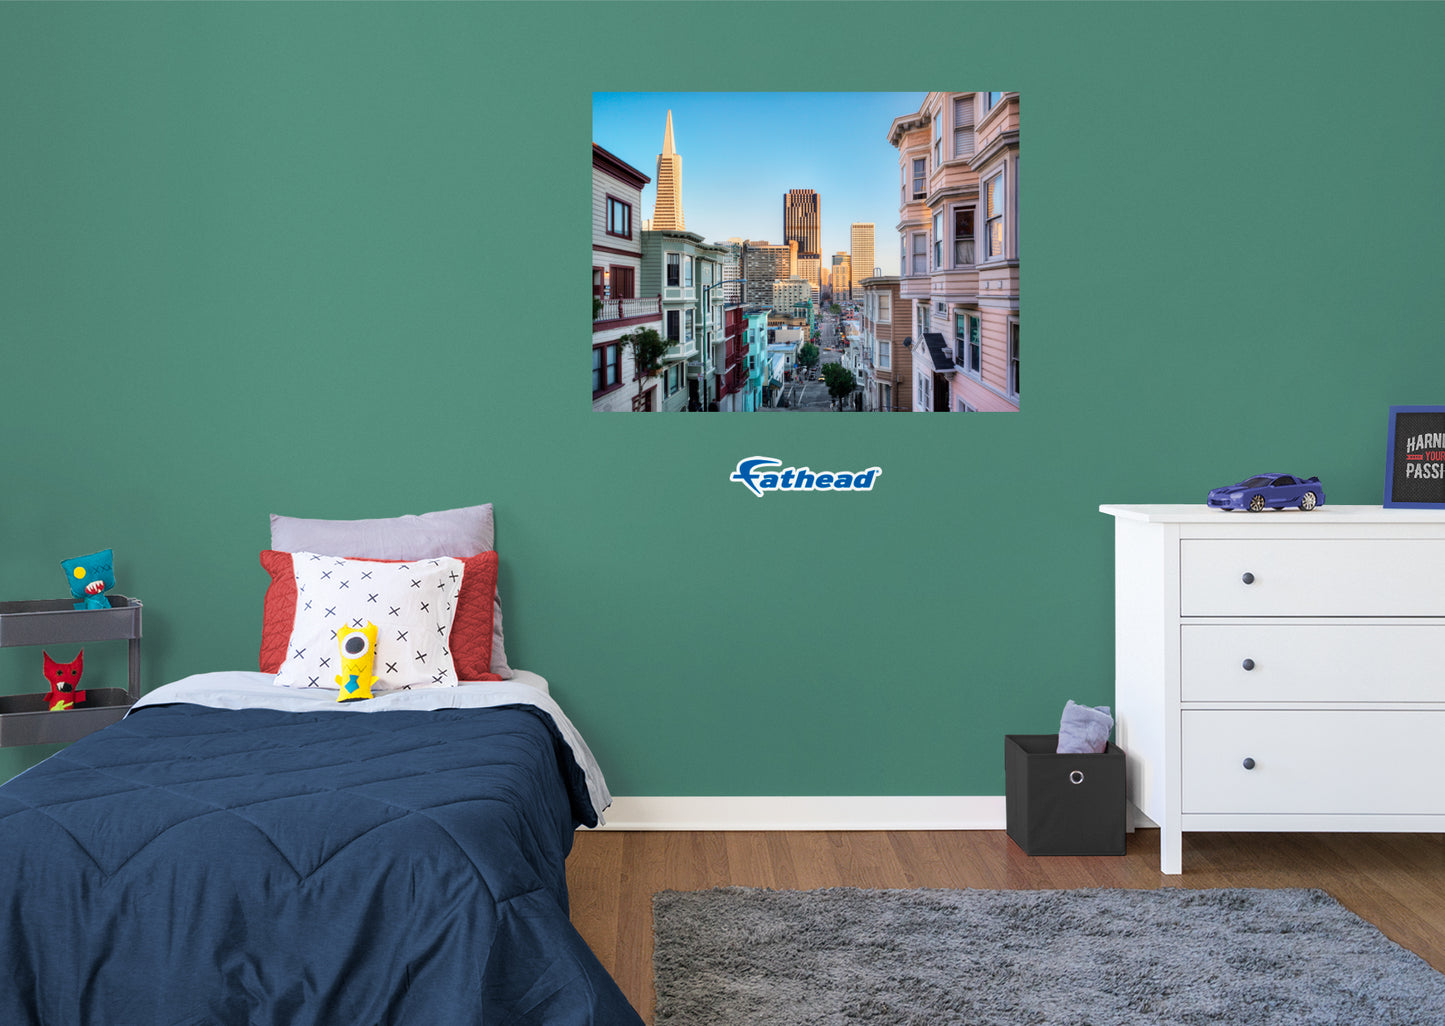 Generic Scenery:  Realistic Urban Details Poster        -   Removable     Adhesive Decal